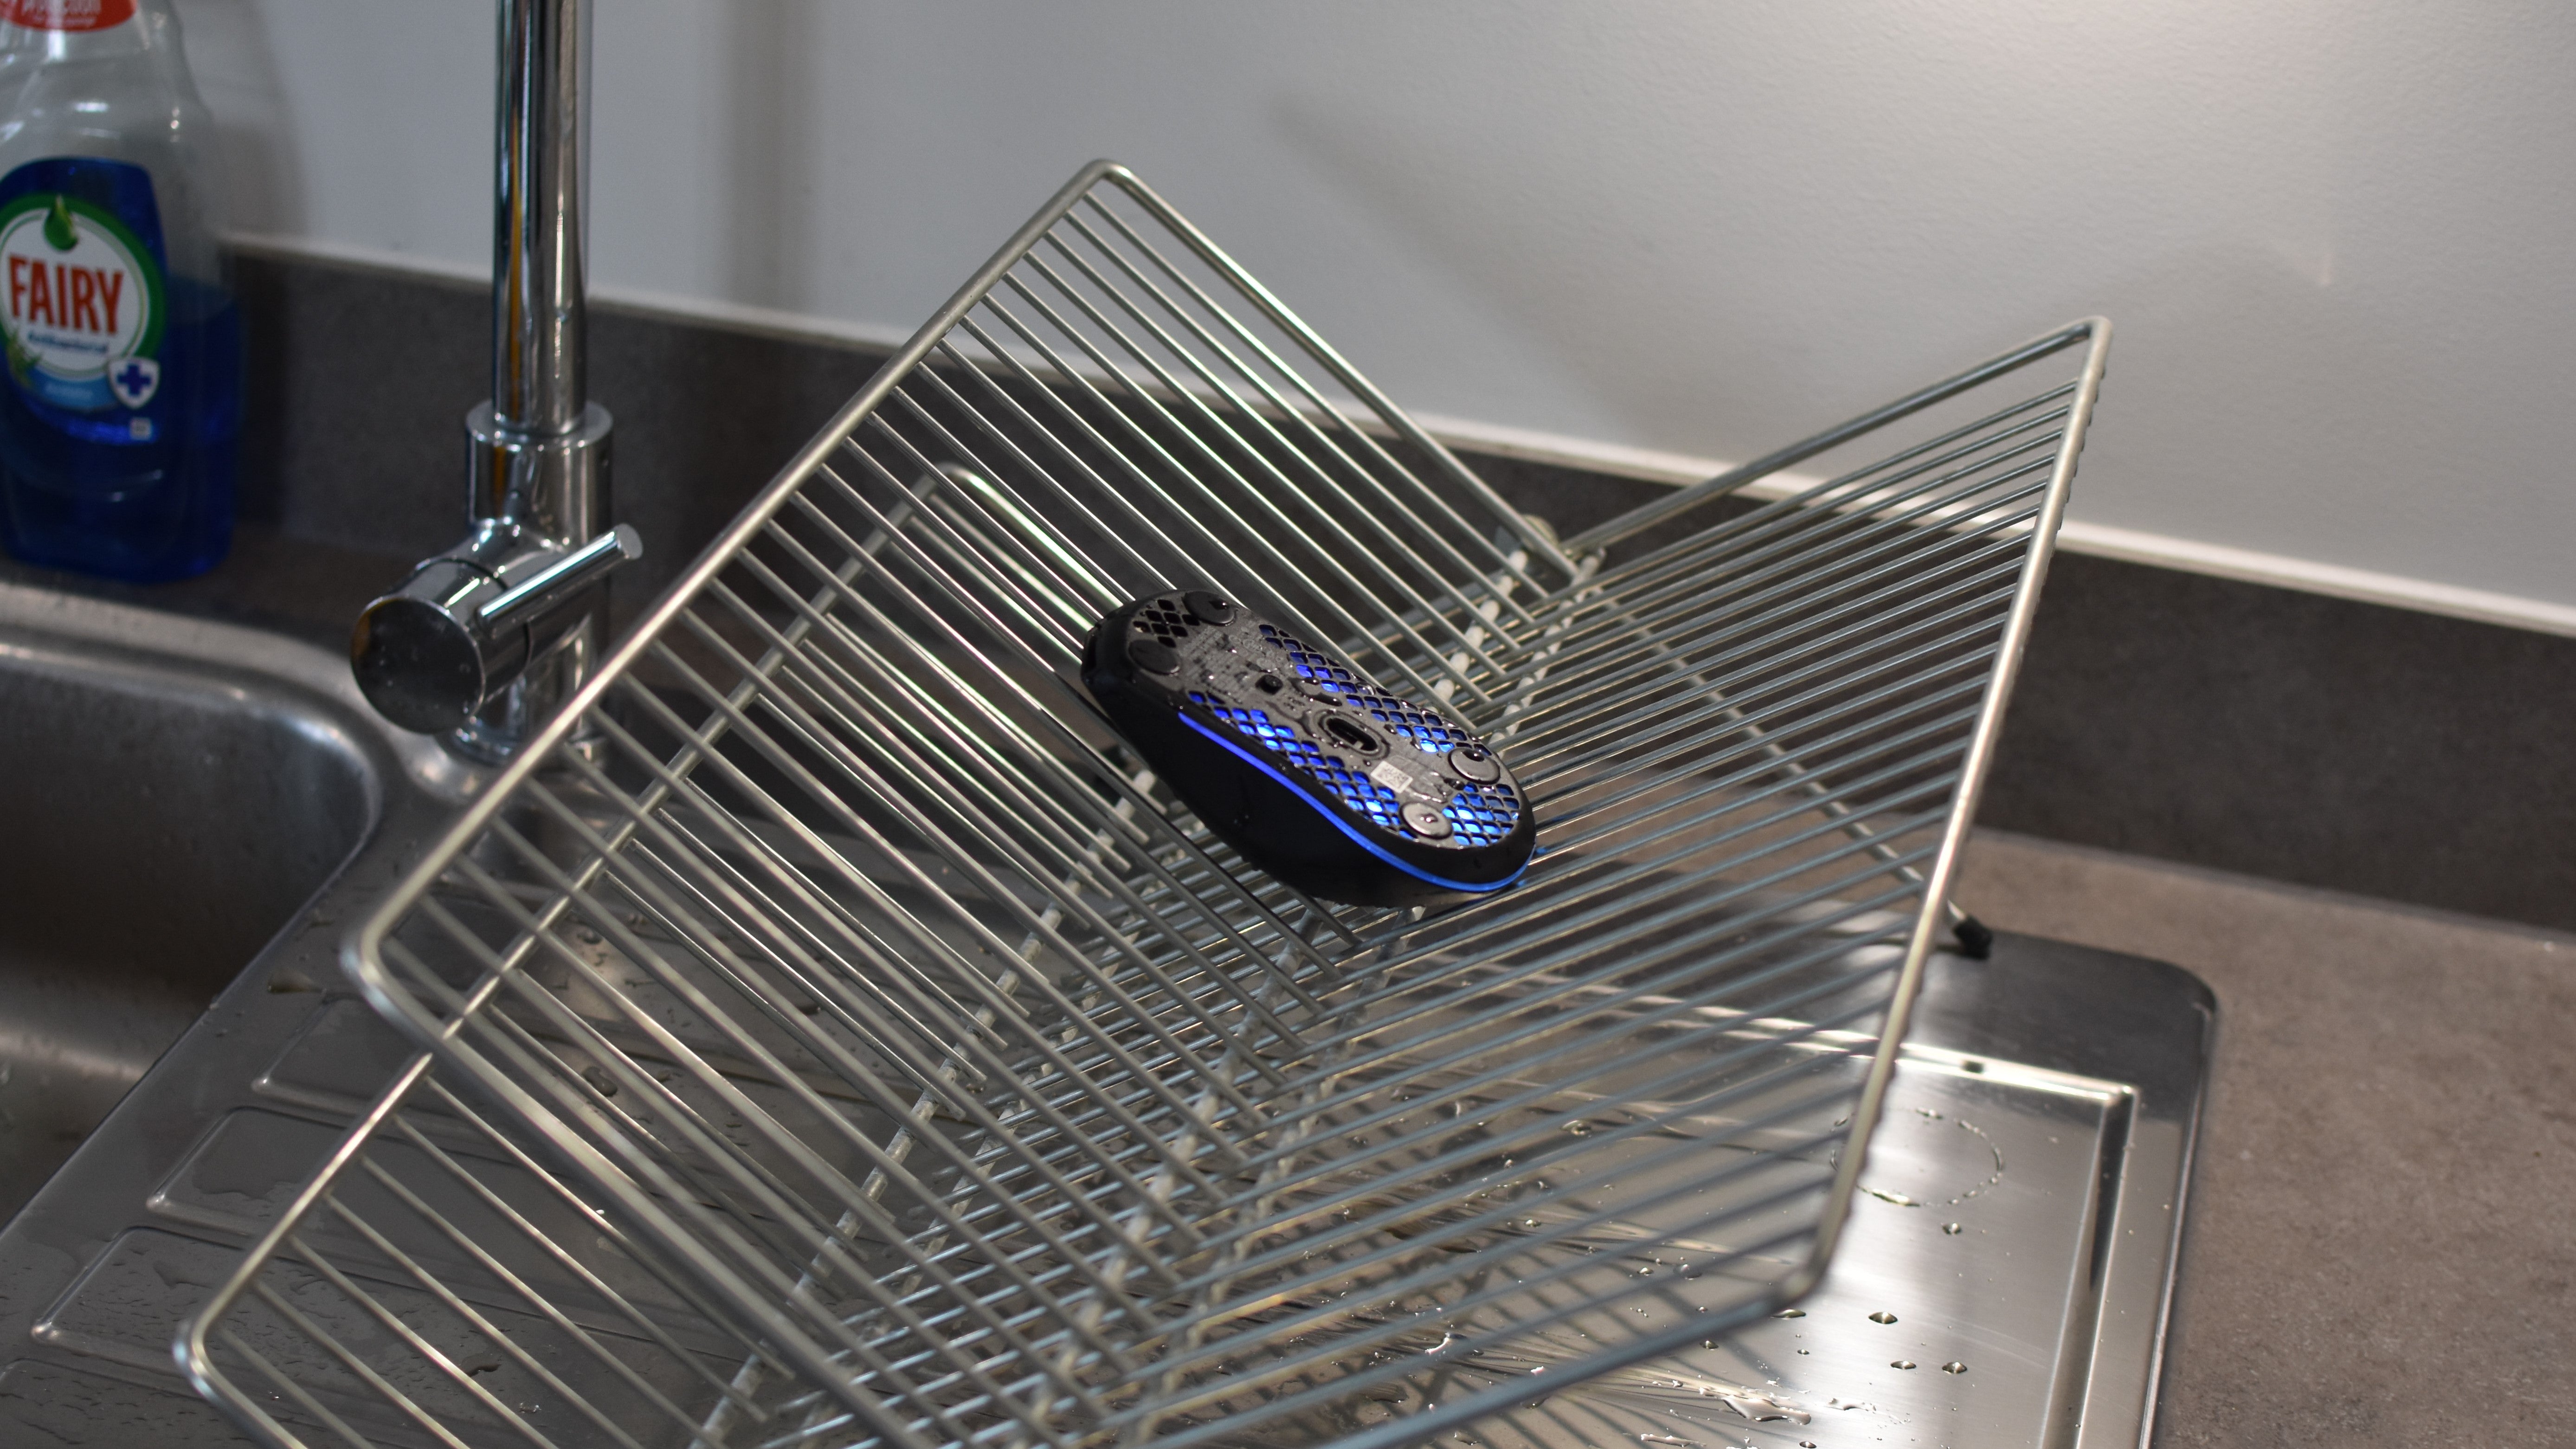 A SteelSeries Aerox 3 Wireless mouse drip-drying on a kitchen rack, having been rinsed with water.